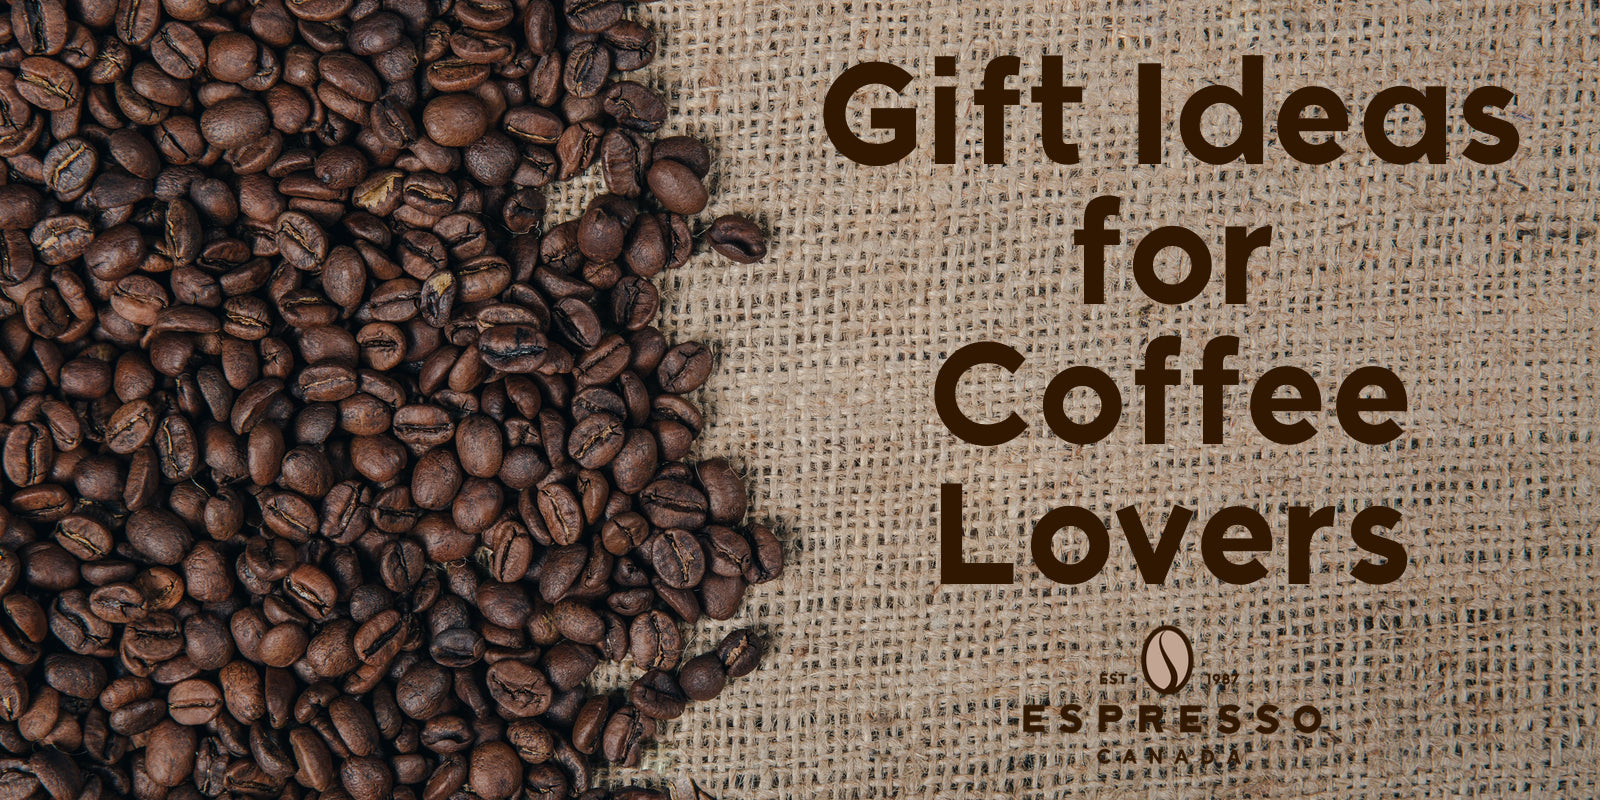 Coffee Lovers Gift Guide